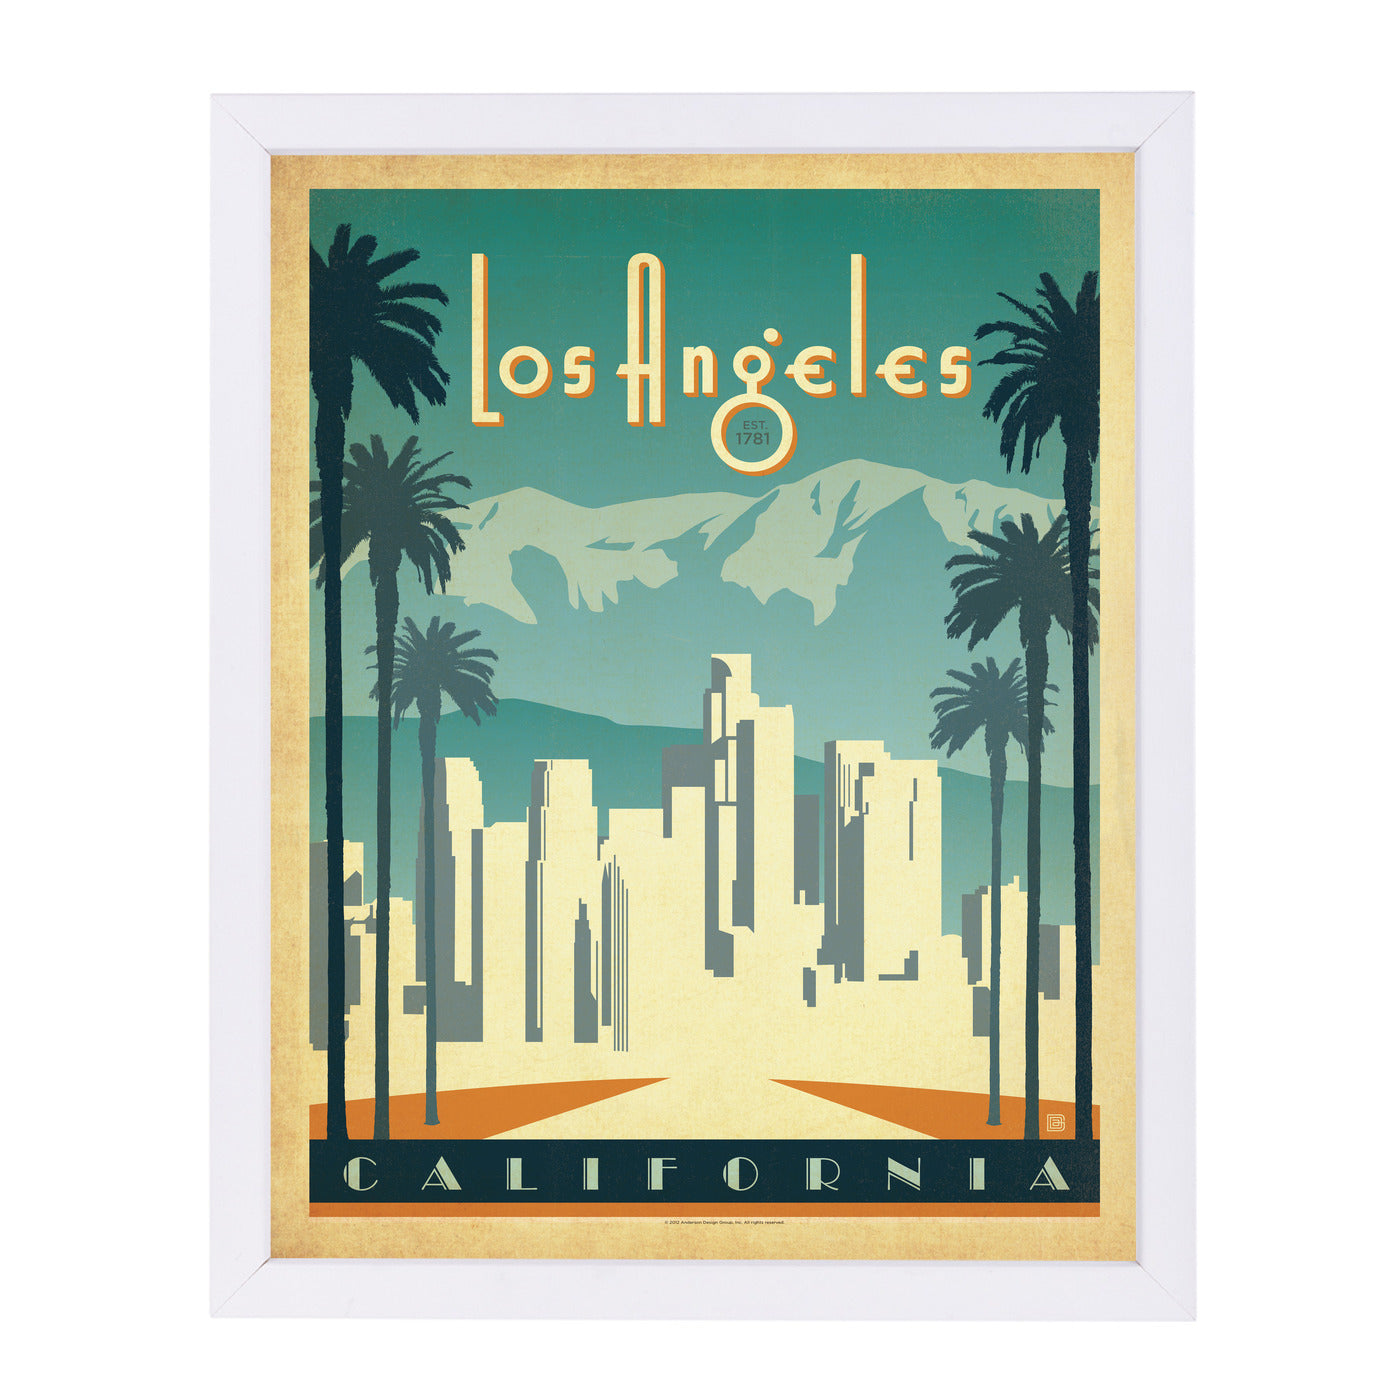 Los Angeles by Anderson Design Group Framed Print - Americanflat